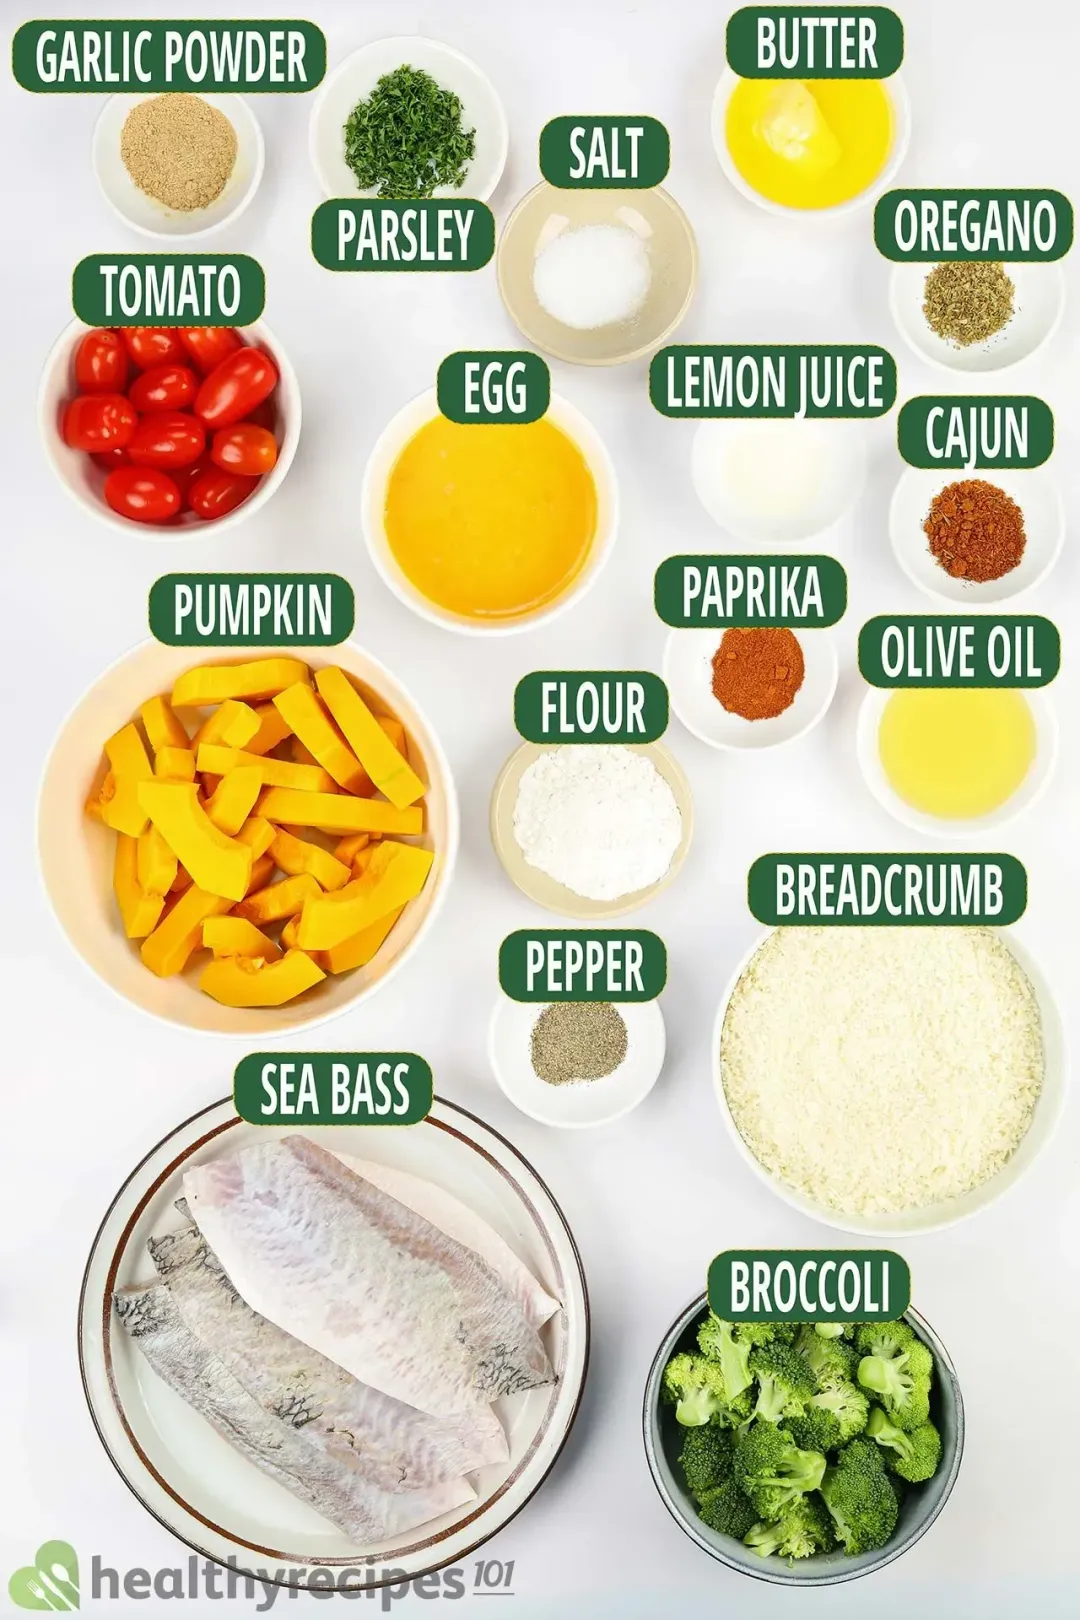 Ingredients for Panko crusted Sea Bass